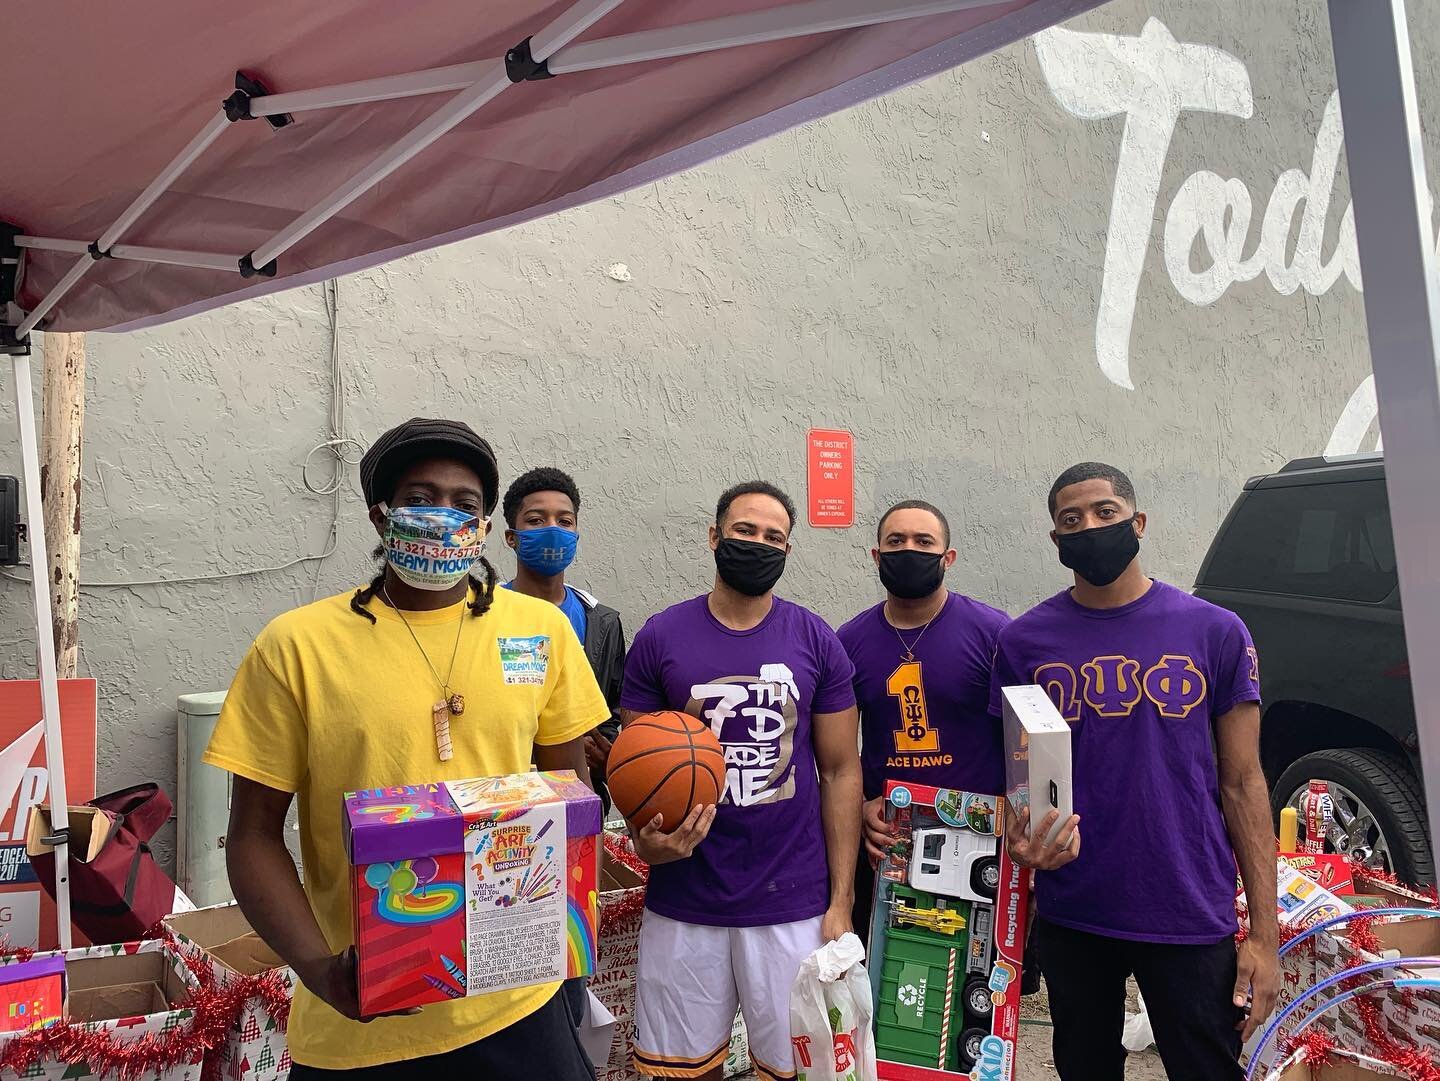 This past Sunday The Brothers of Chi Tau Tau chapter of Omega Psi Phi fraternity Inc. joined The Leach Firm to help distribute Toys to the Community. Wishing a Happy Holidays and a Merry Christmas 🐶🎄